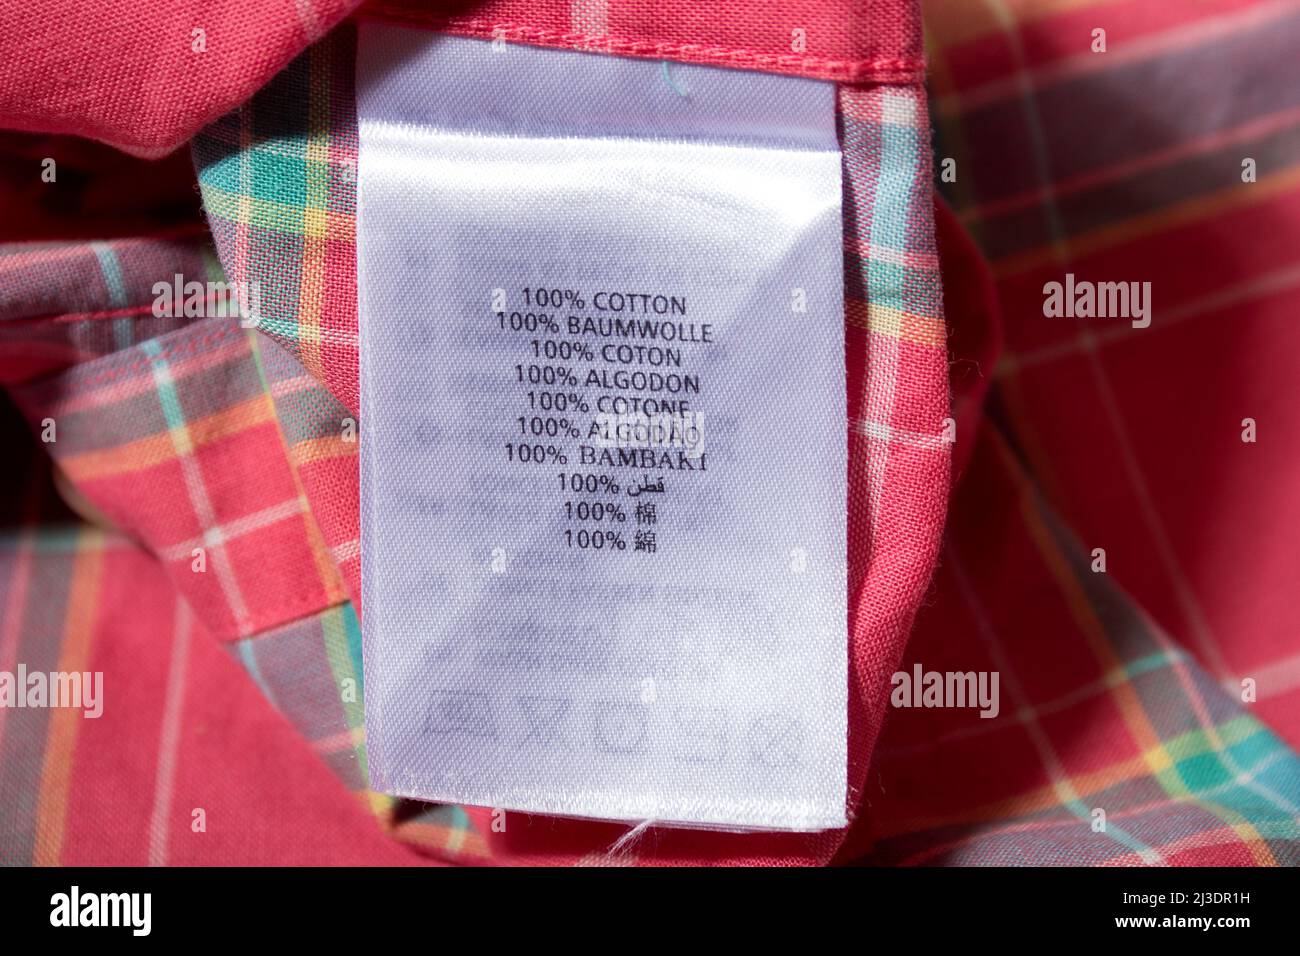 Clothing fabric material tag. Stock Photo